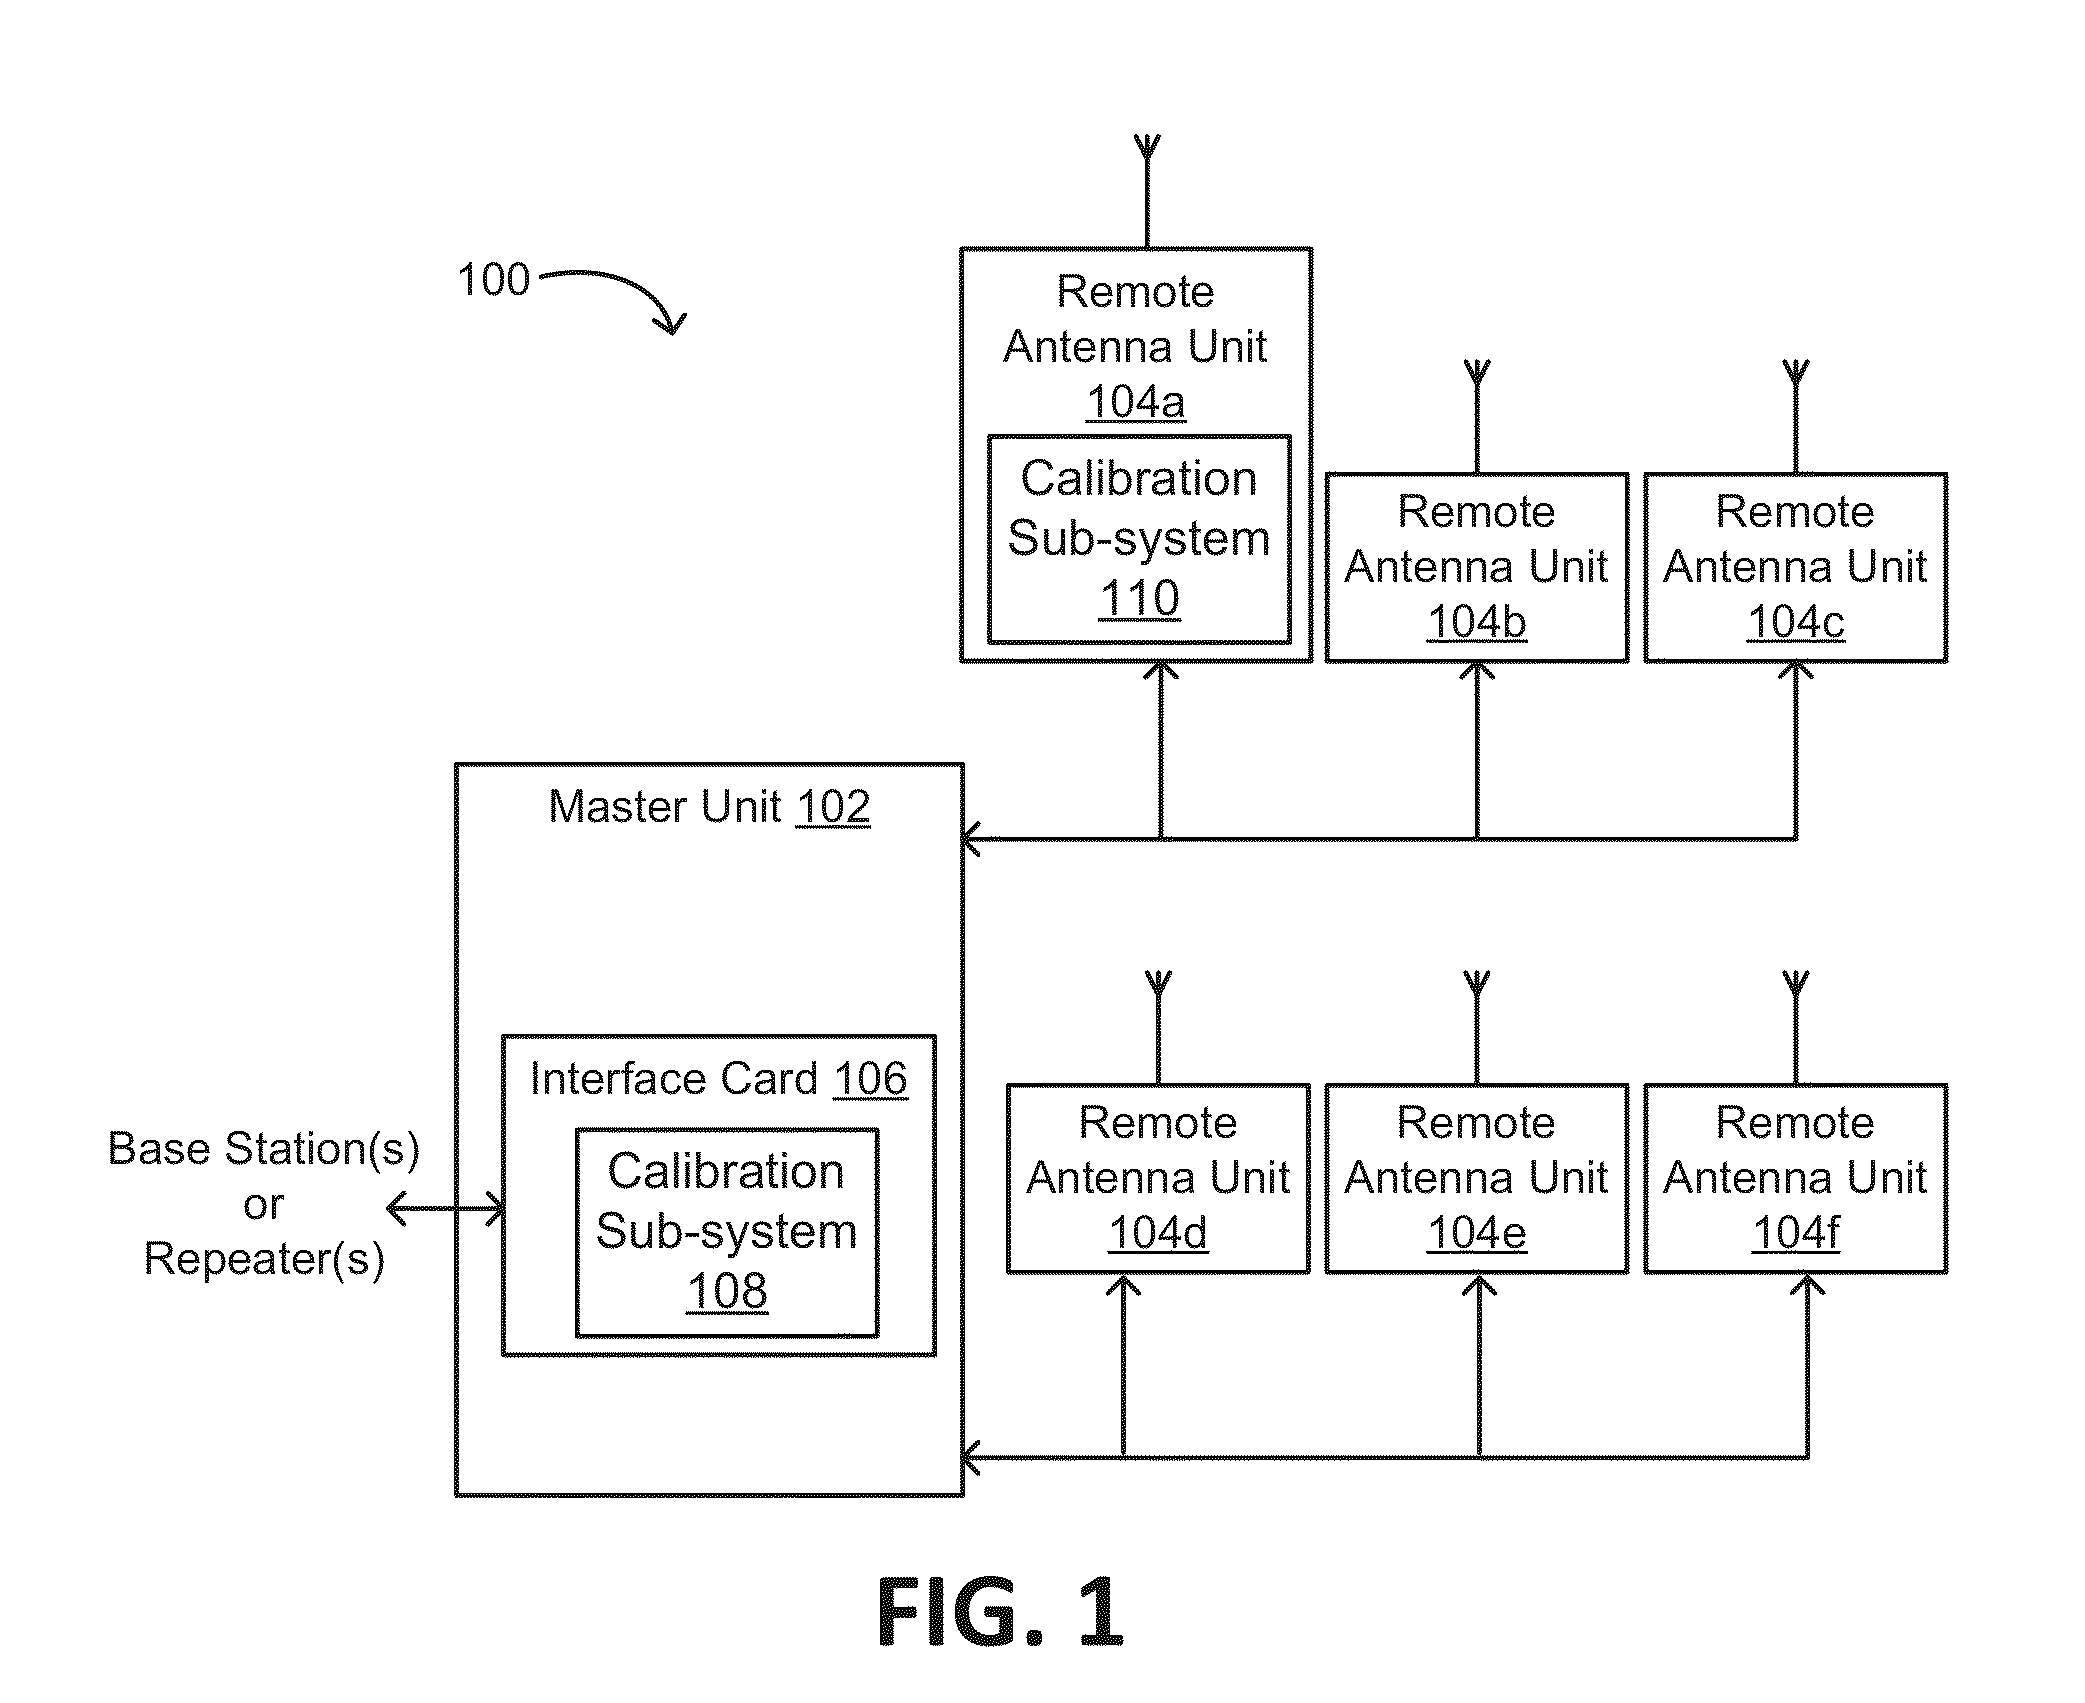 Calibration sub-system for telecommunication systems